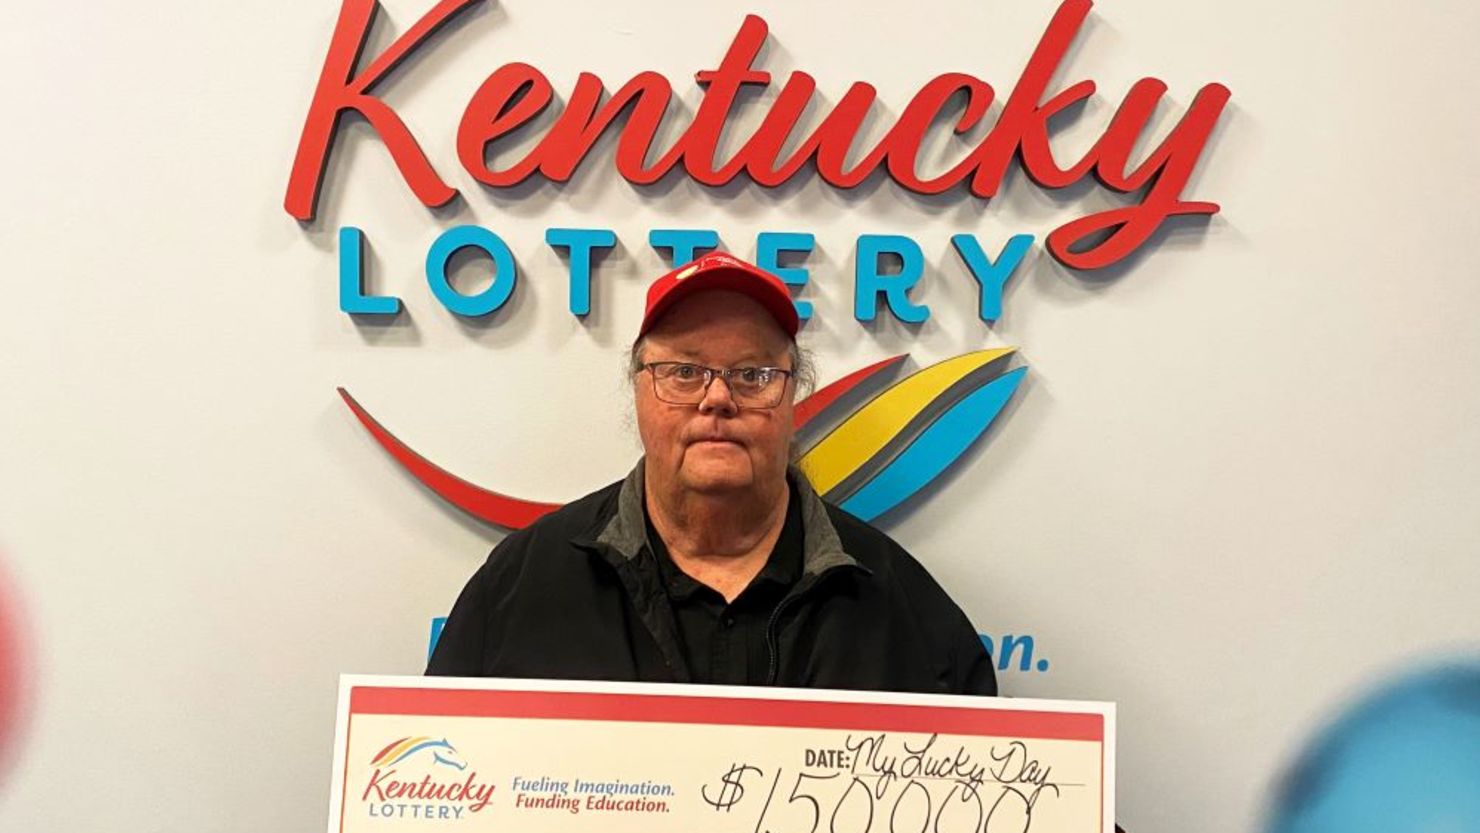 Charles Stallard will pay off his house loan after winning the lottery in Louisville.